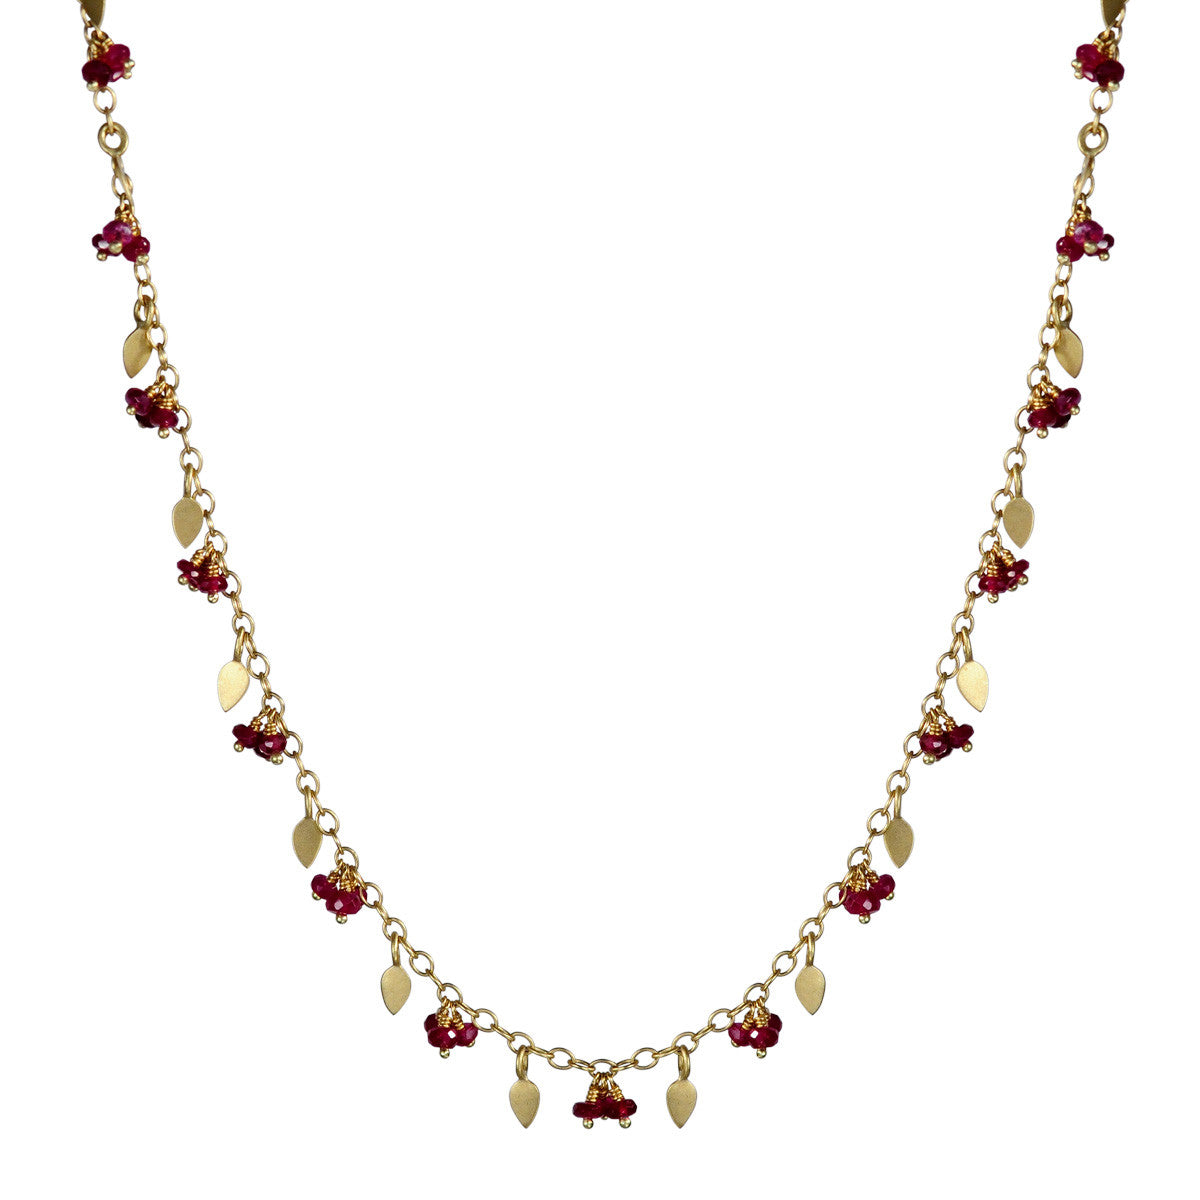 18K Gold 1 Tier Tiny Petal Chain with Rubies